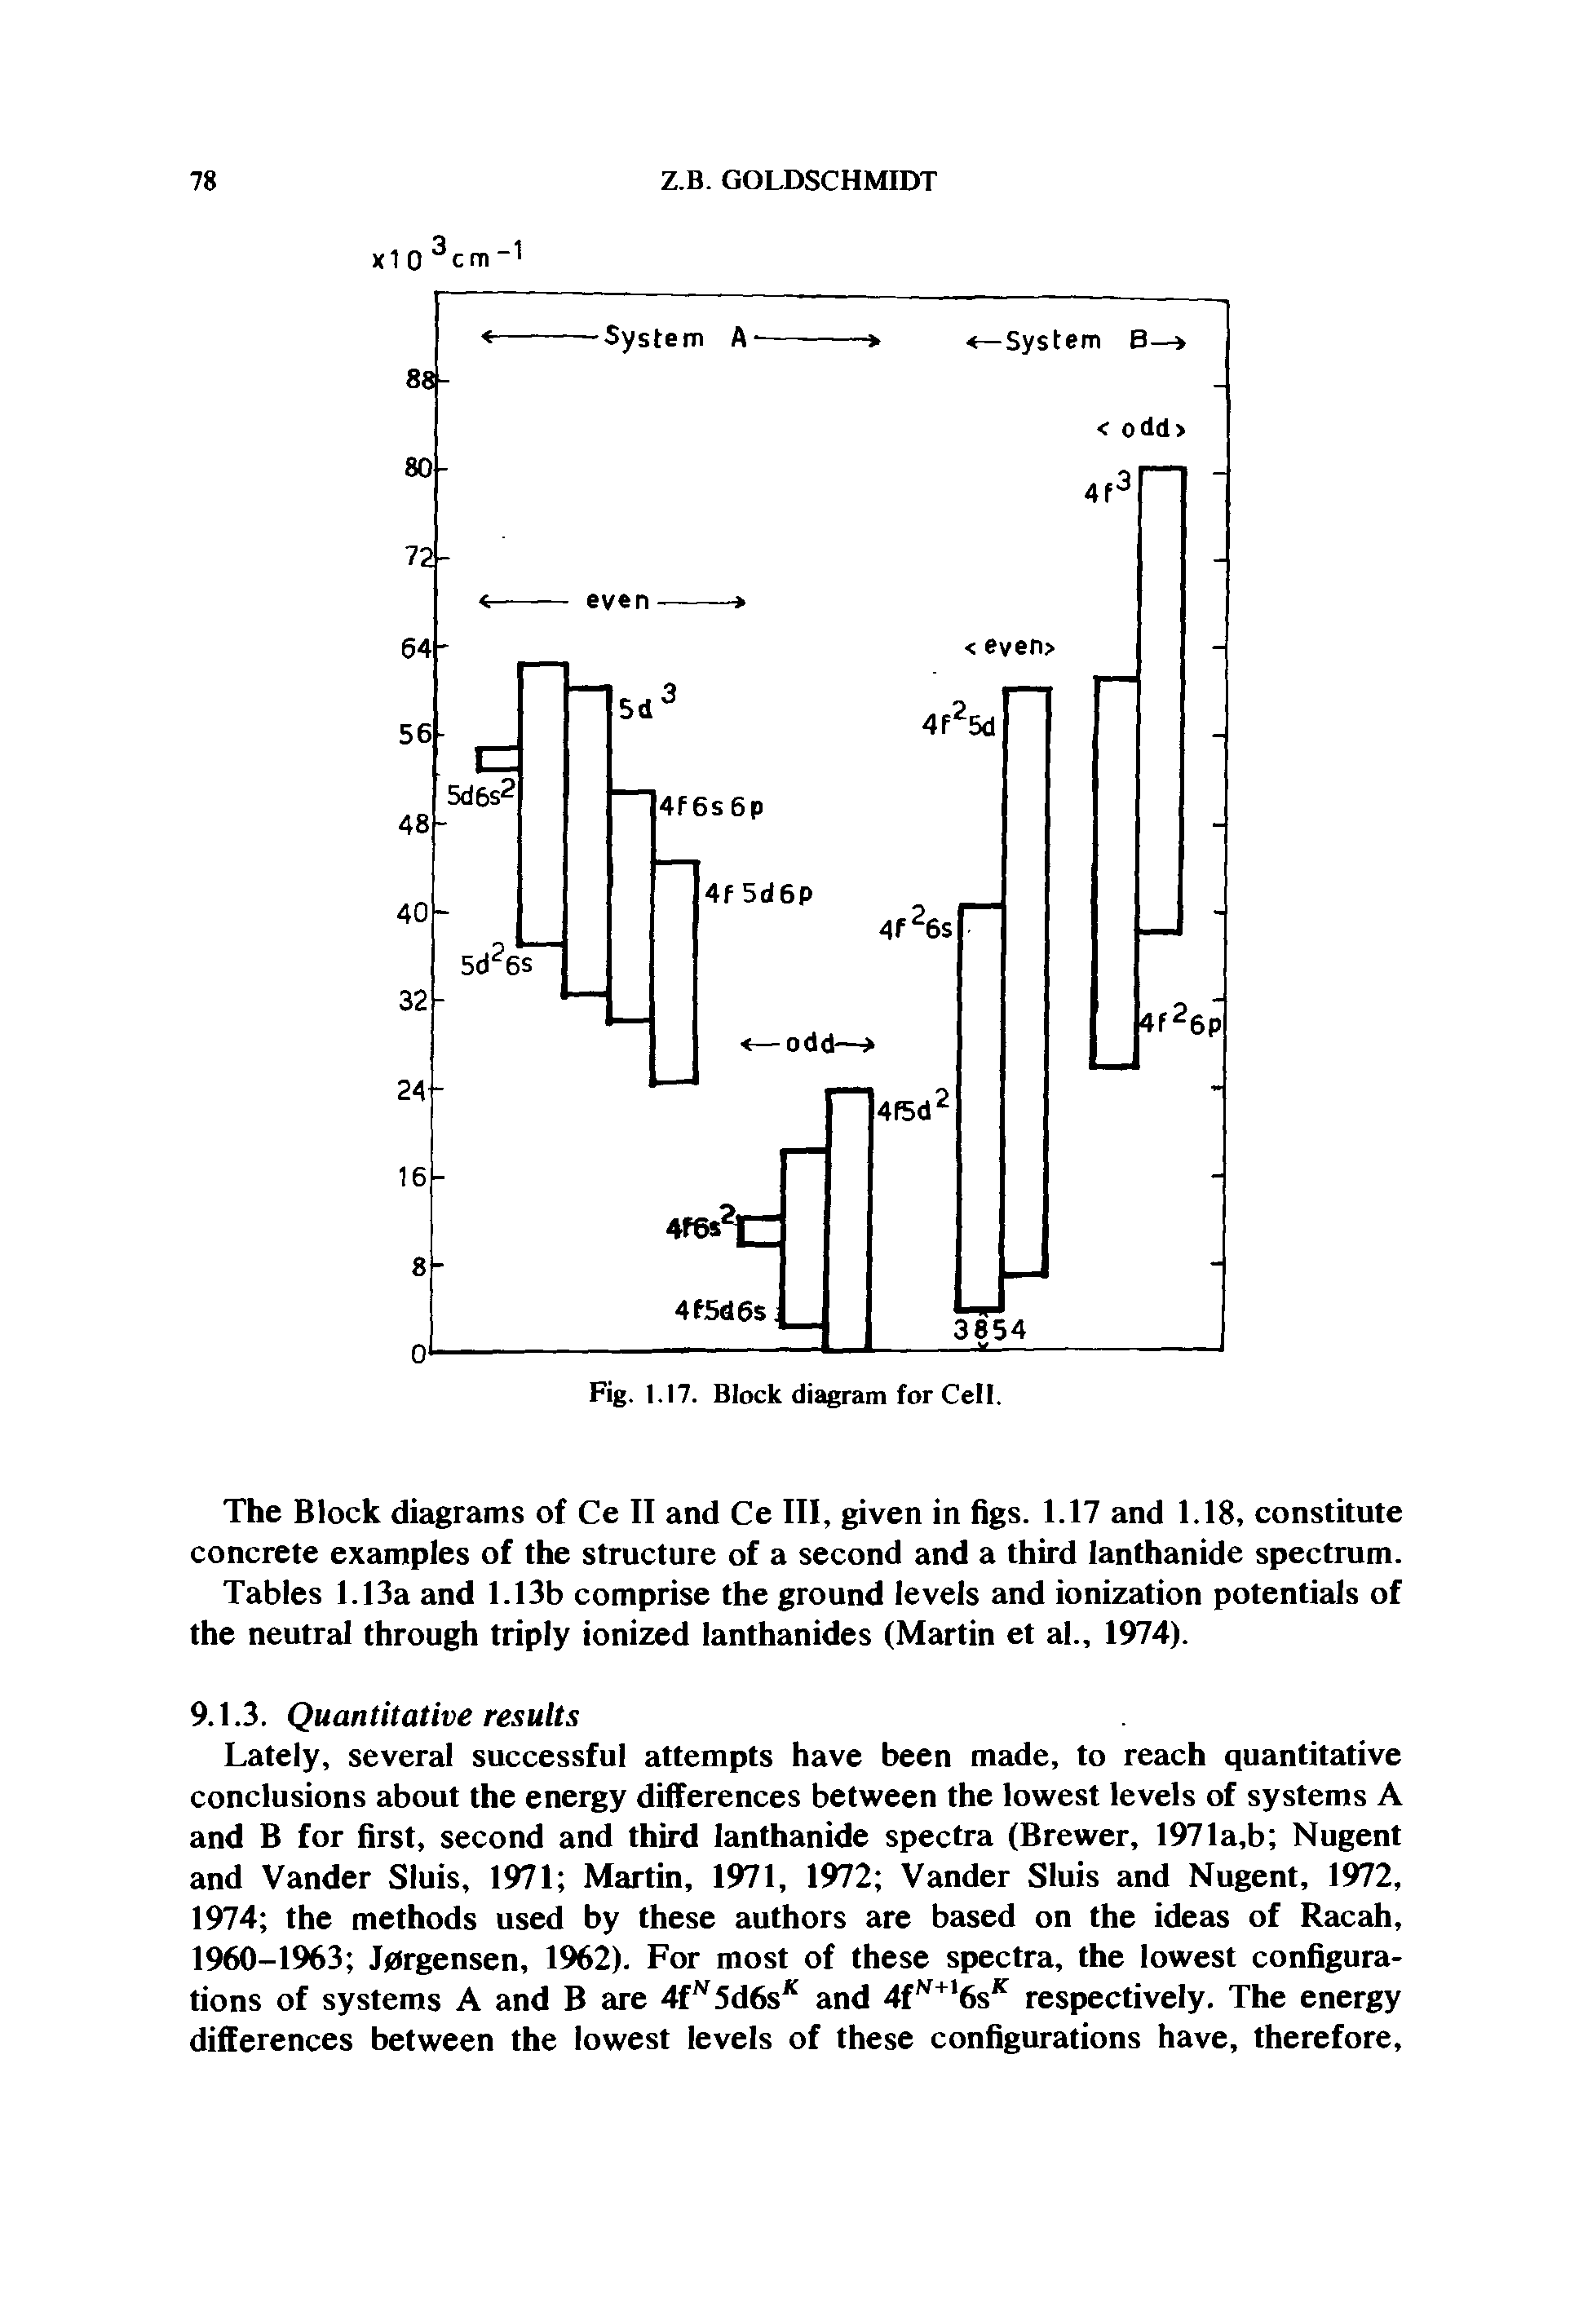 Tables 1.13a and 1.13b comprise the ground levels and ionization potentials of the neutral through triply ionized lanthanides (Martin et al., 1974).